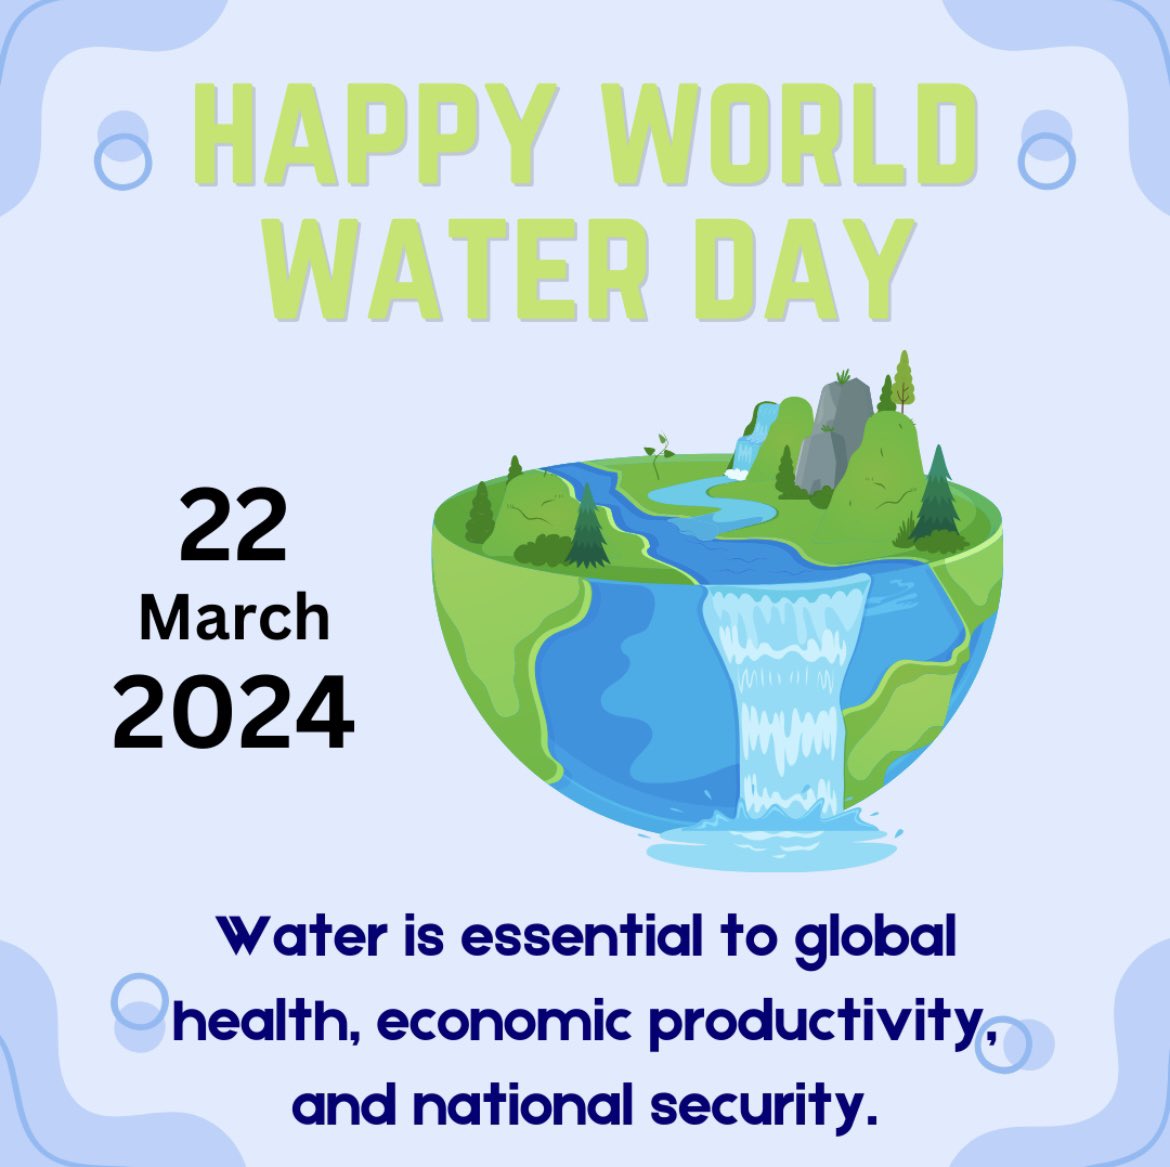 💧 Happy World Water Day! Let's cherish this life-giving resource and work together towards a sustainable future for clean water access for all DC residents. 💙 #WaterIsLife